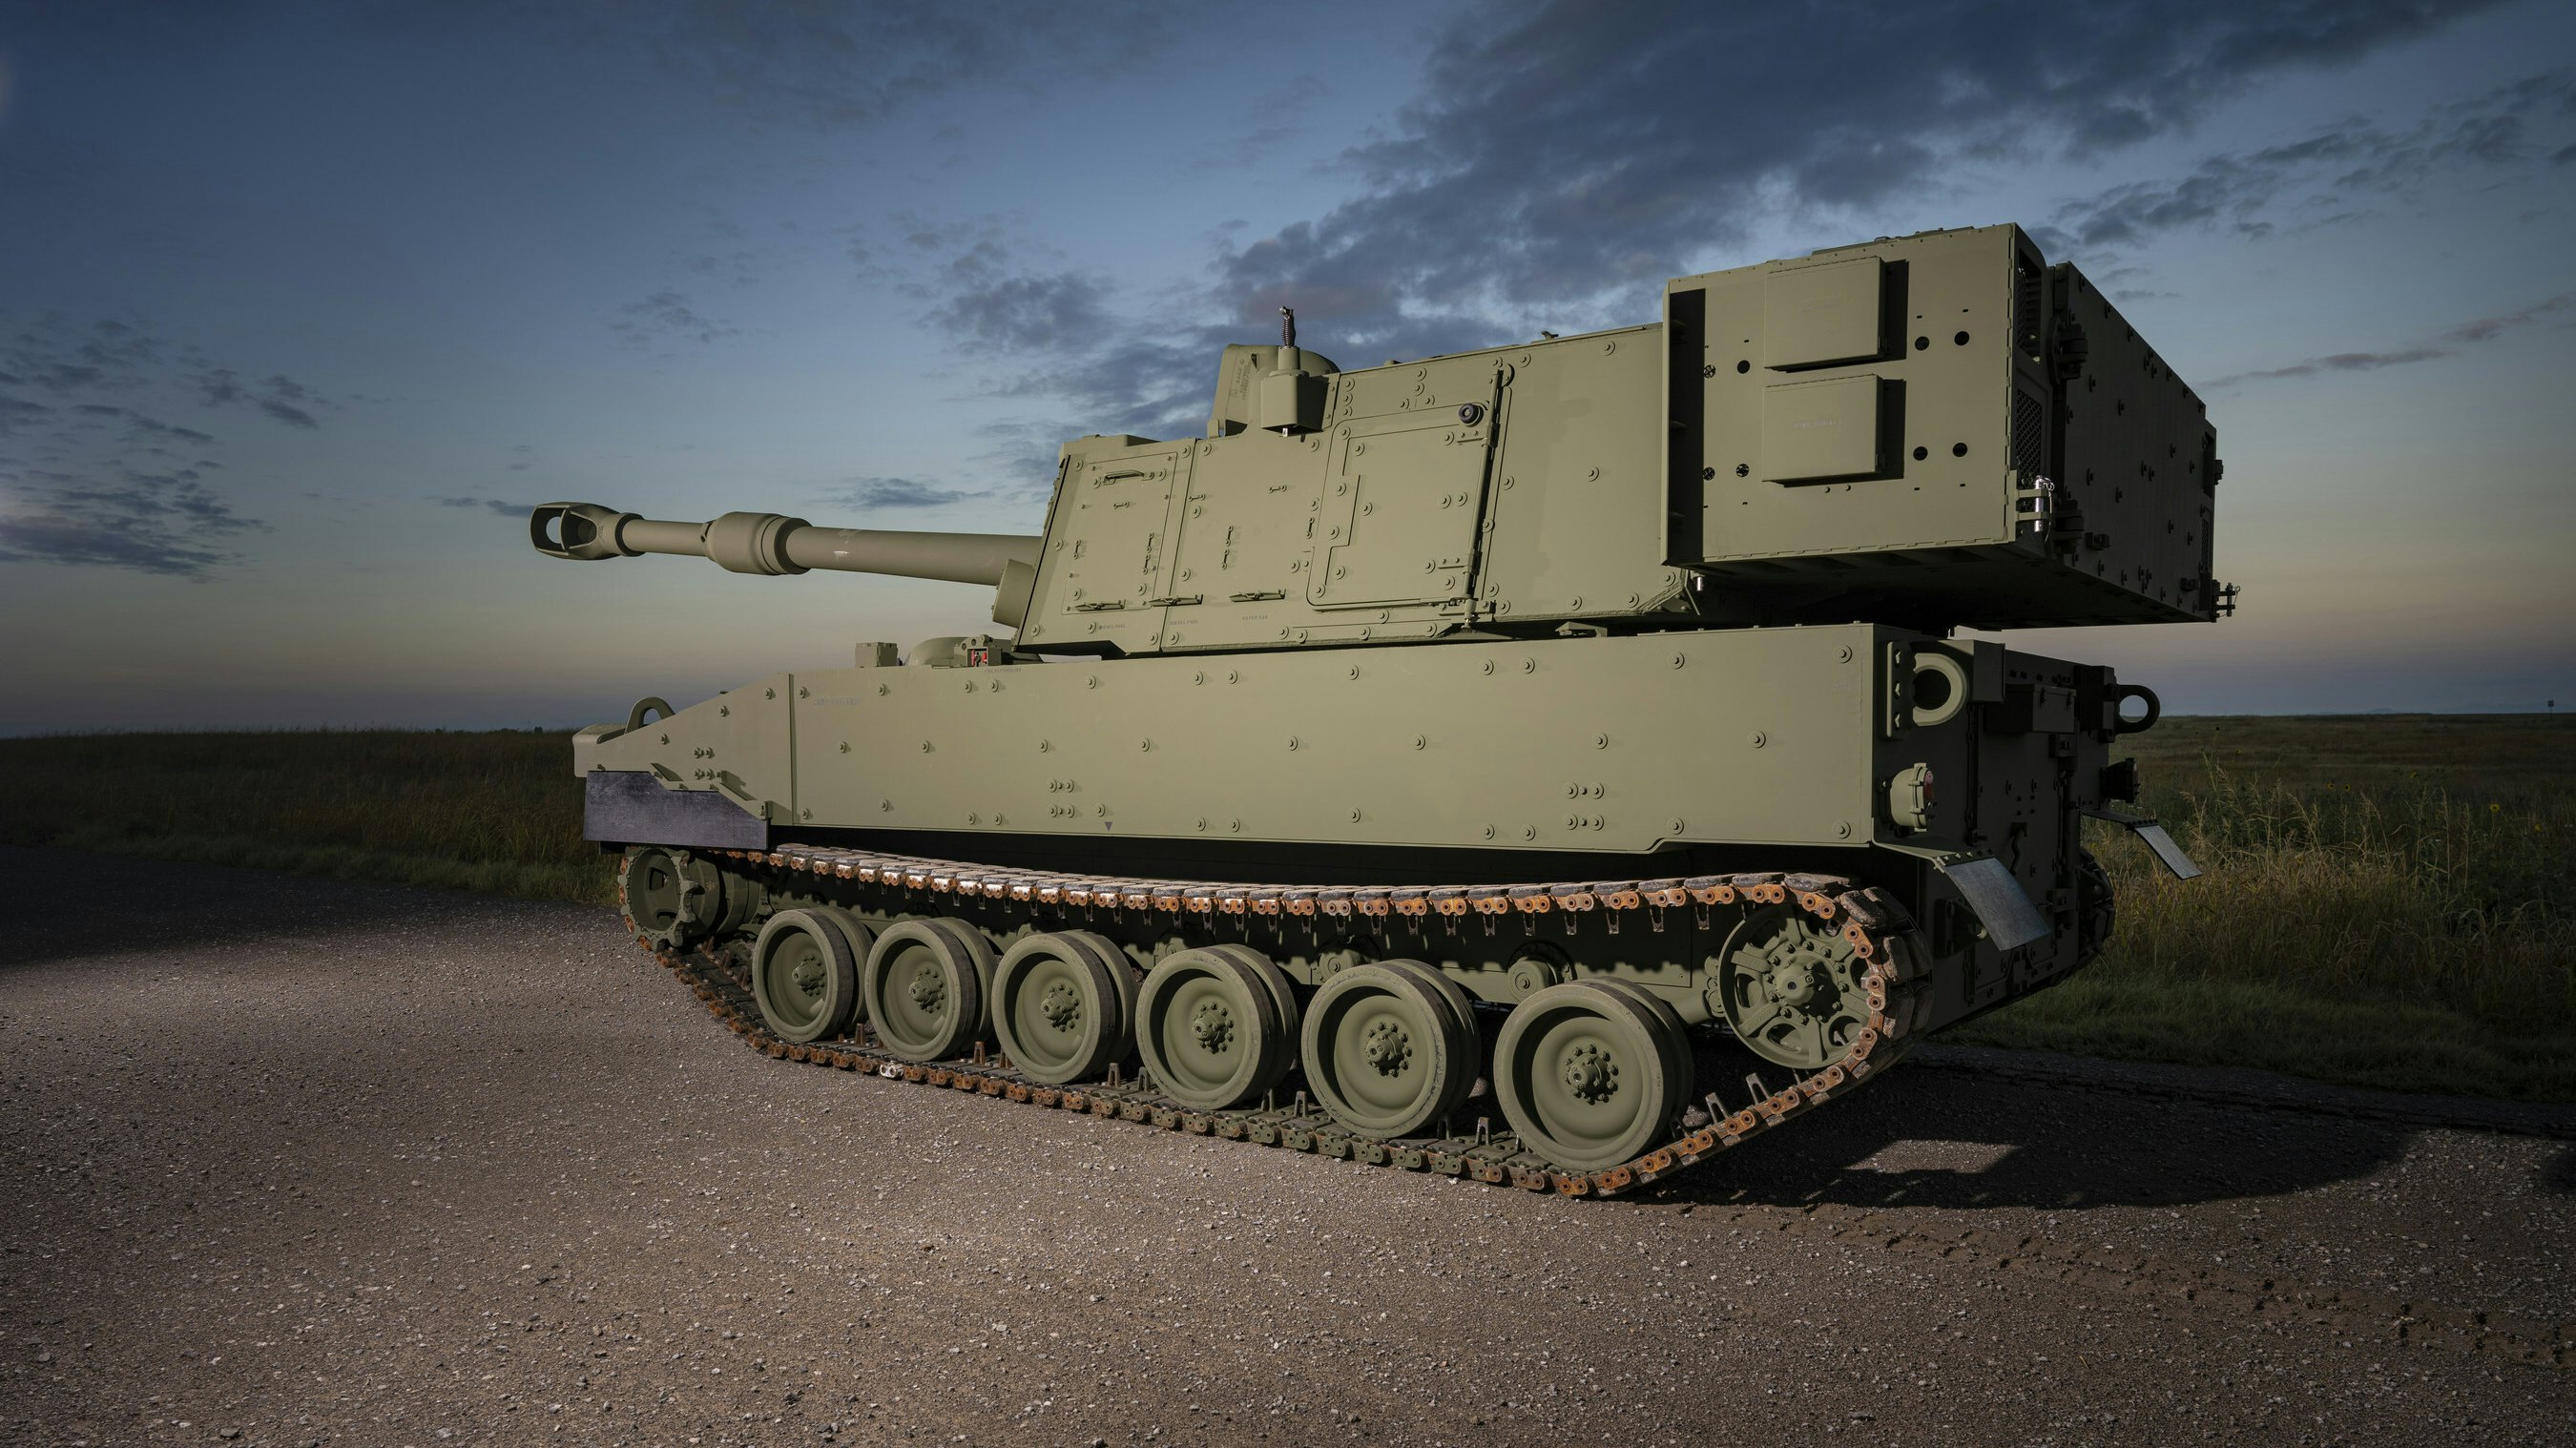 BAE Systems Receives $318M Contract for Self-Propelled Howitzers